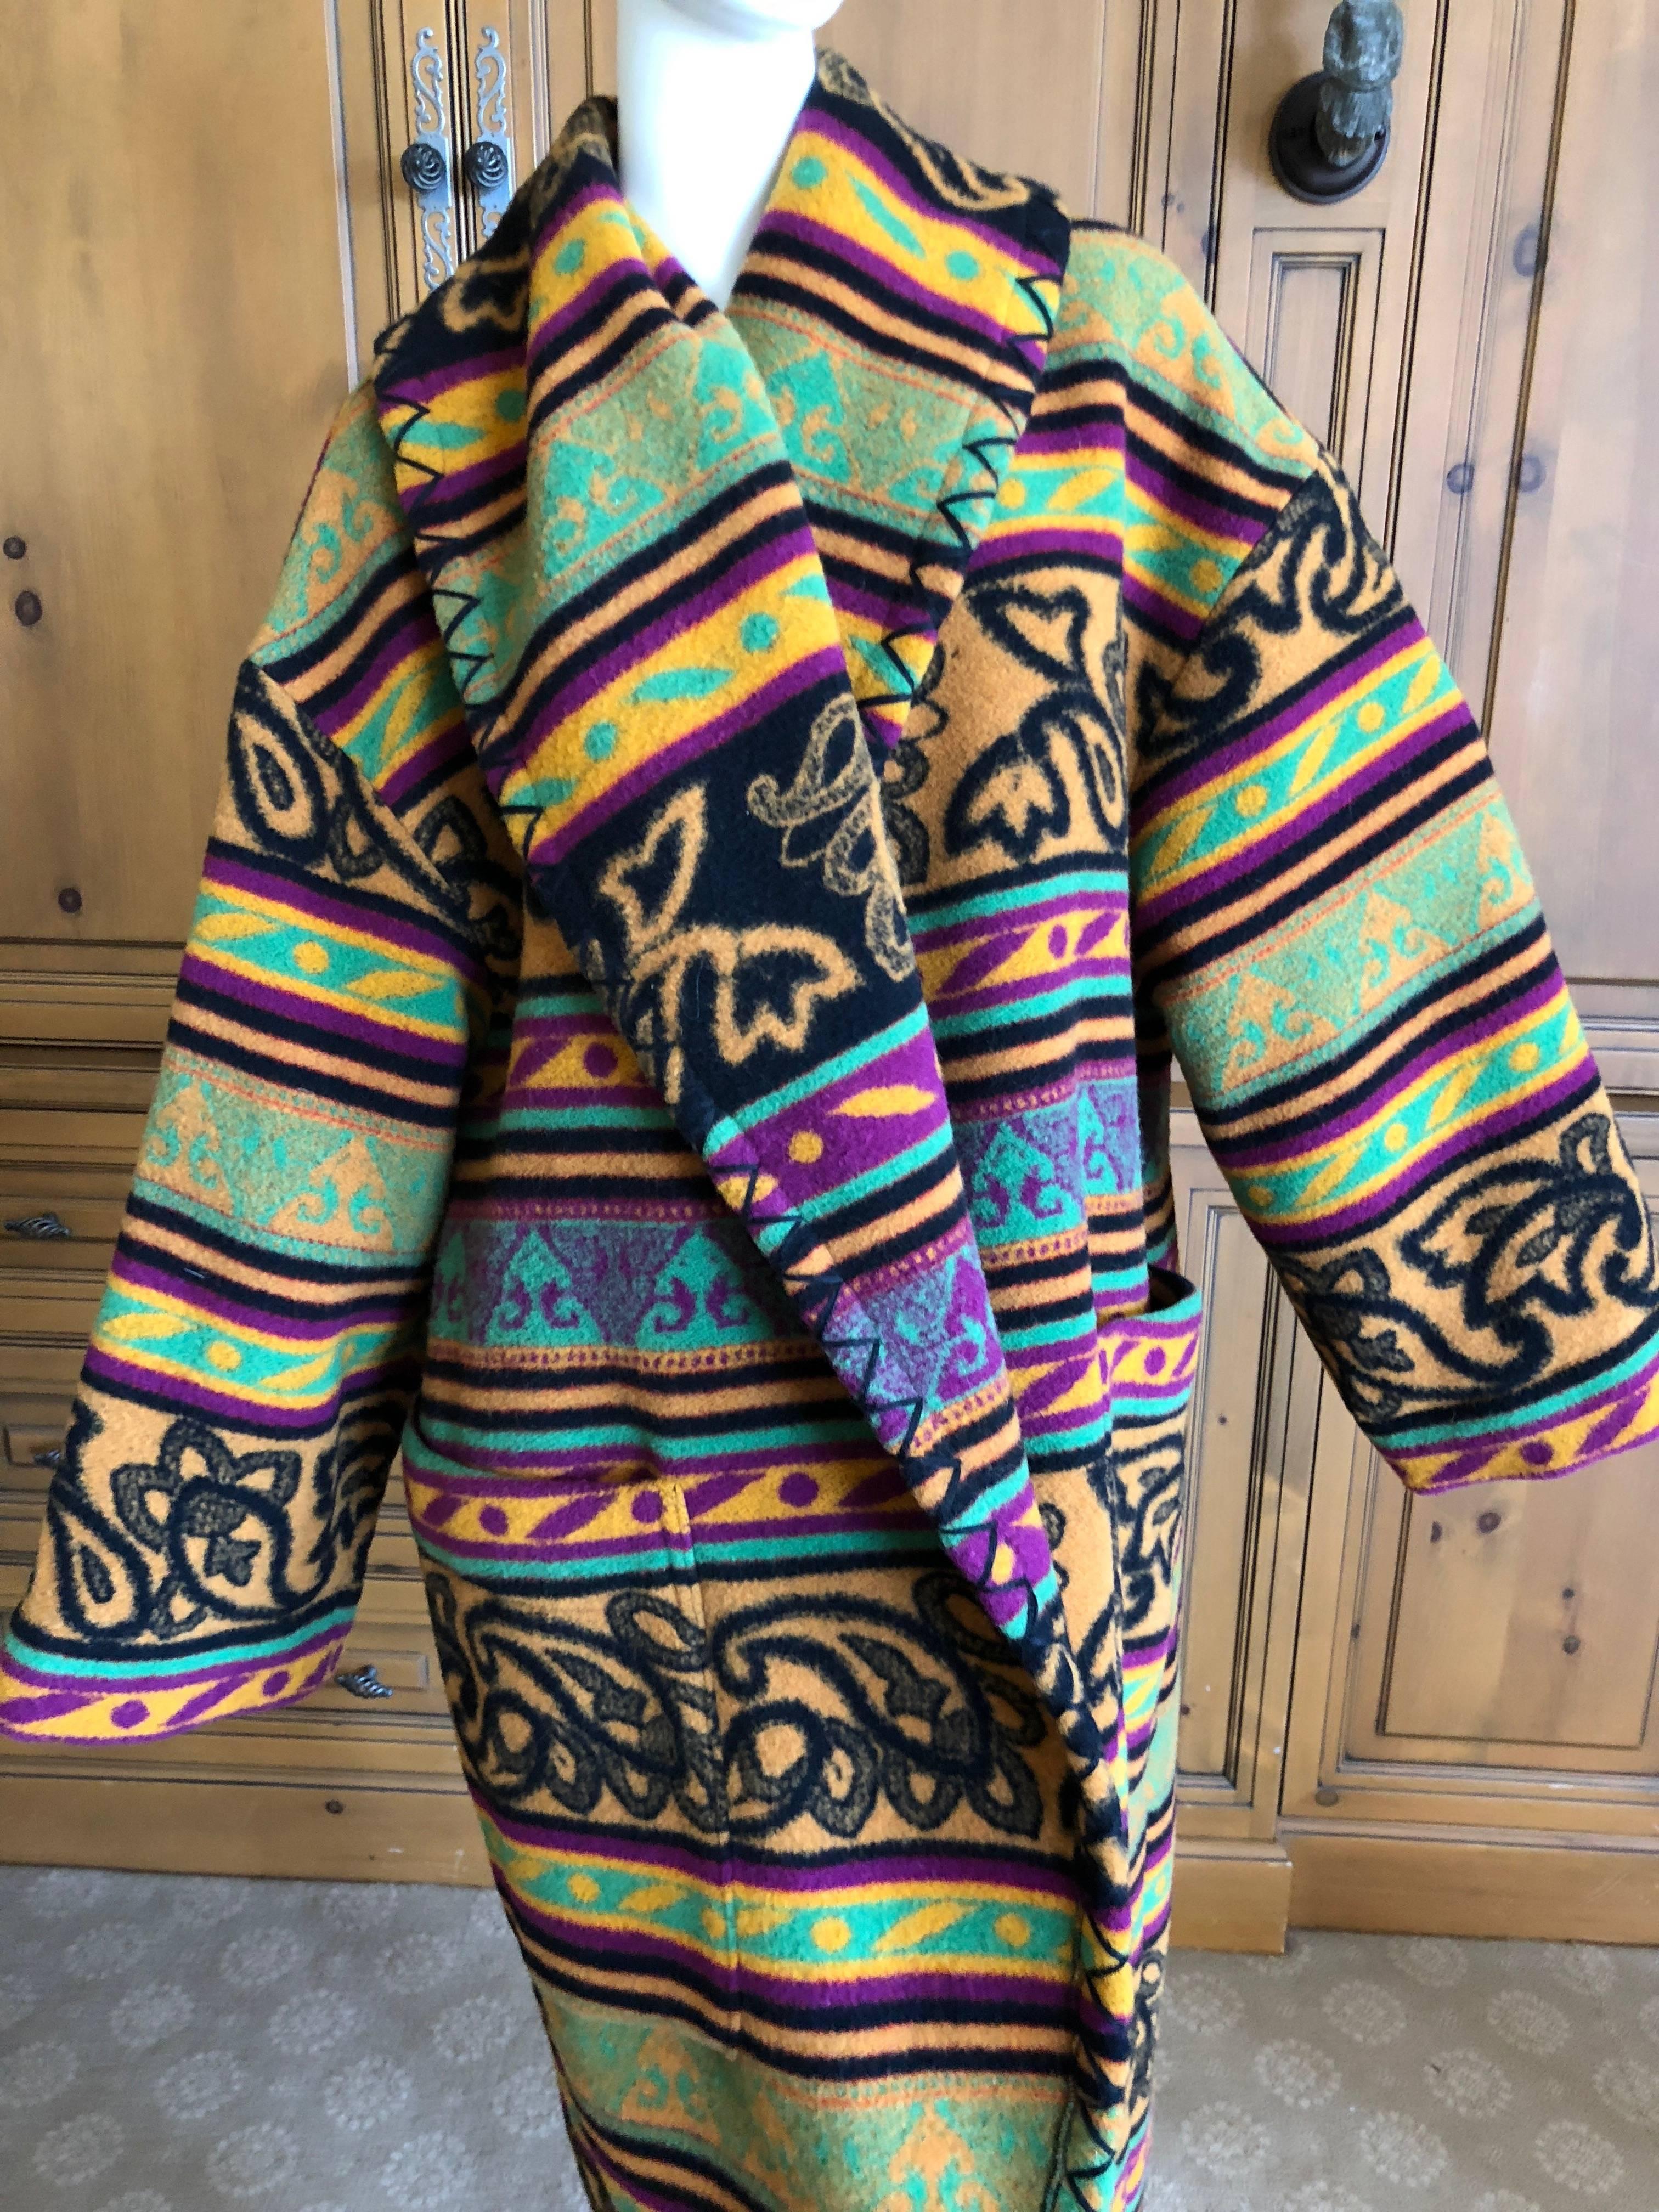 Byblos 1970's Blanket Coat by Gianni Versace
A rare piece from the 70's. Very soft wool
Size 38
Bust 48